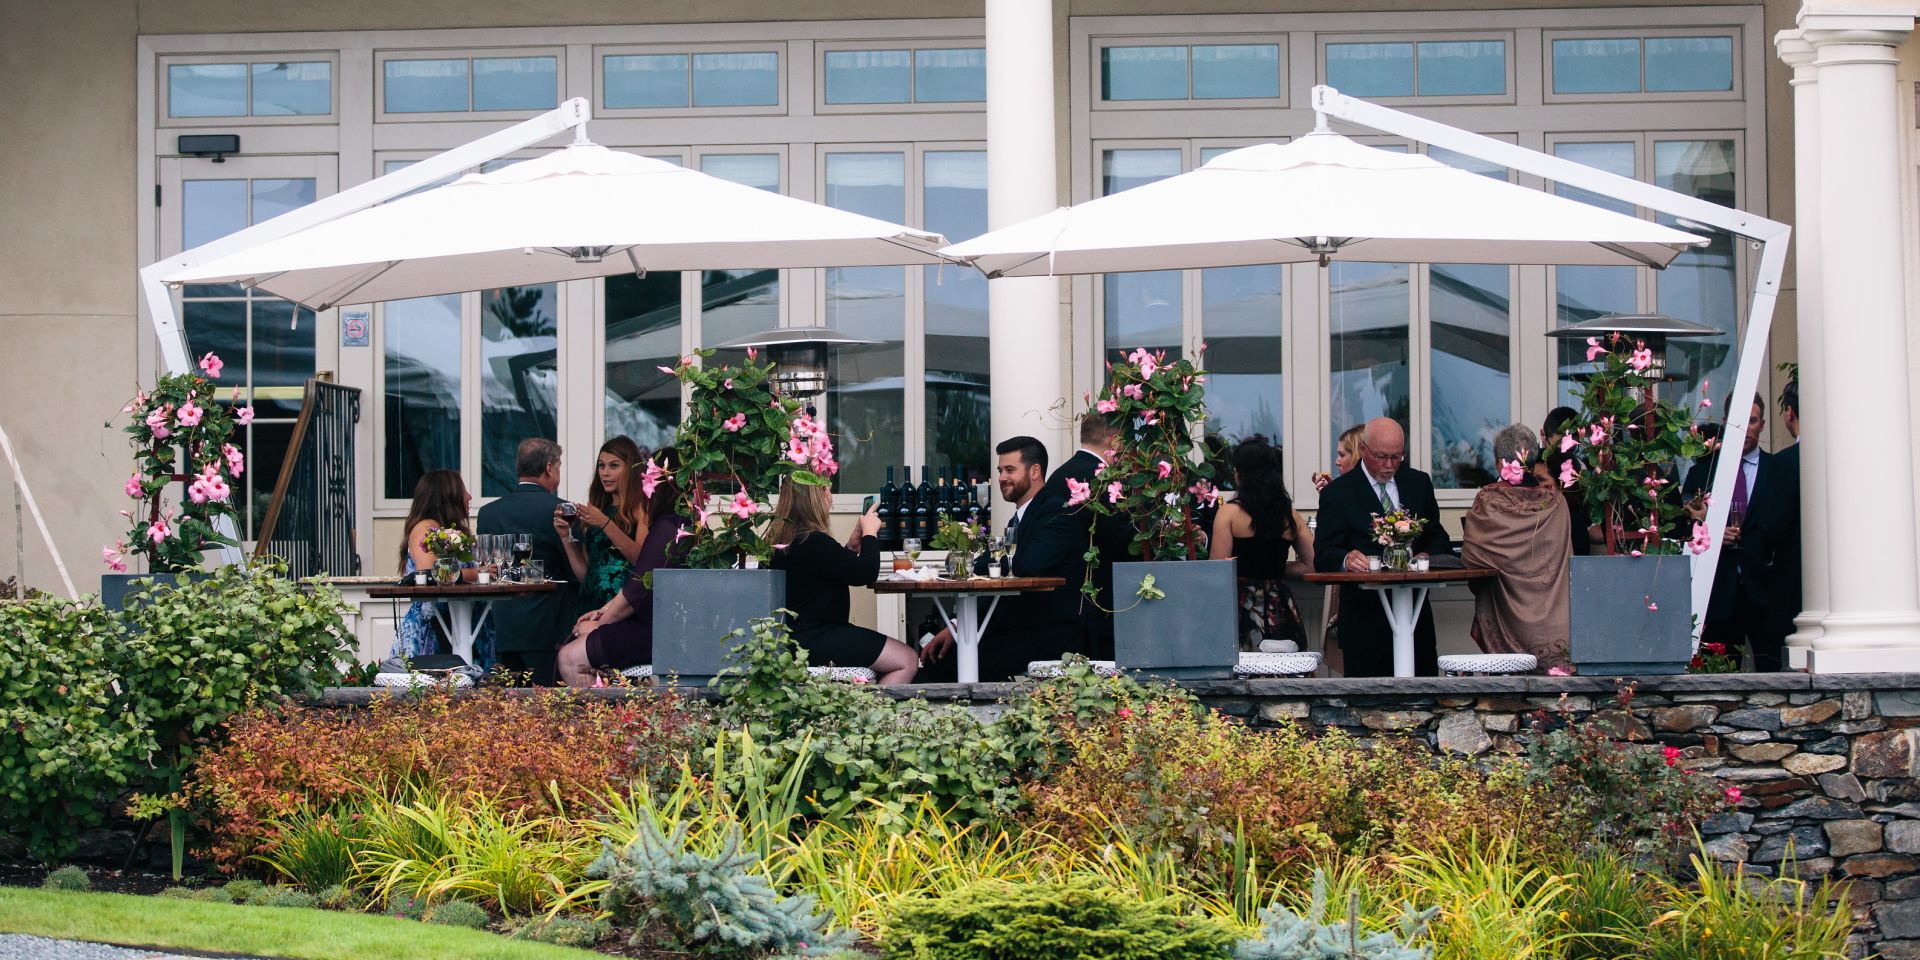 The Terrace serves as one of the most desirable event spaces in Newport.